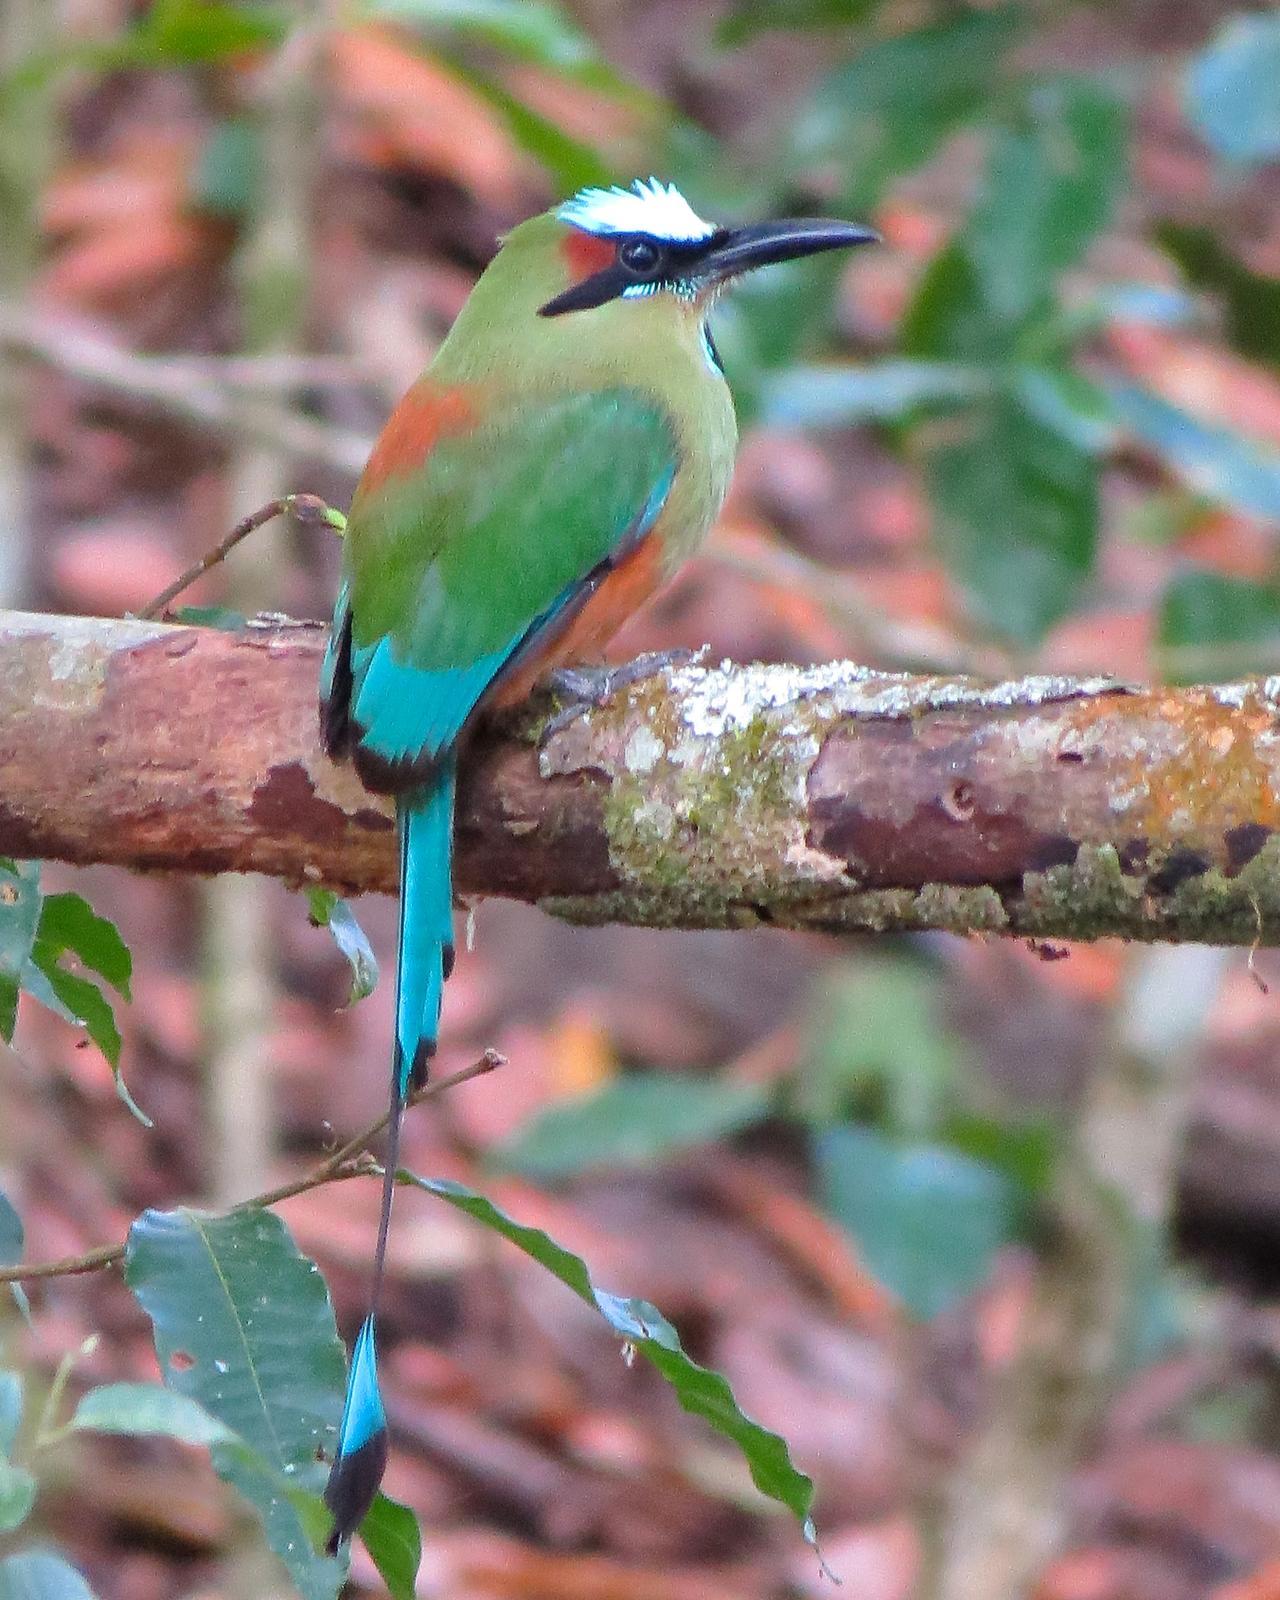 Turquoise-browed Motmot Photo by Drew Weber